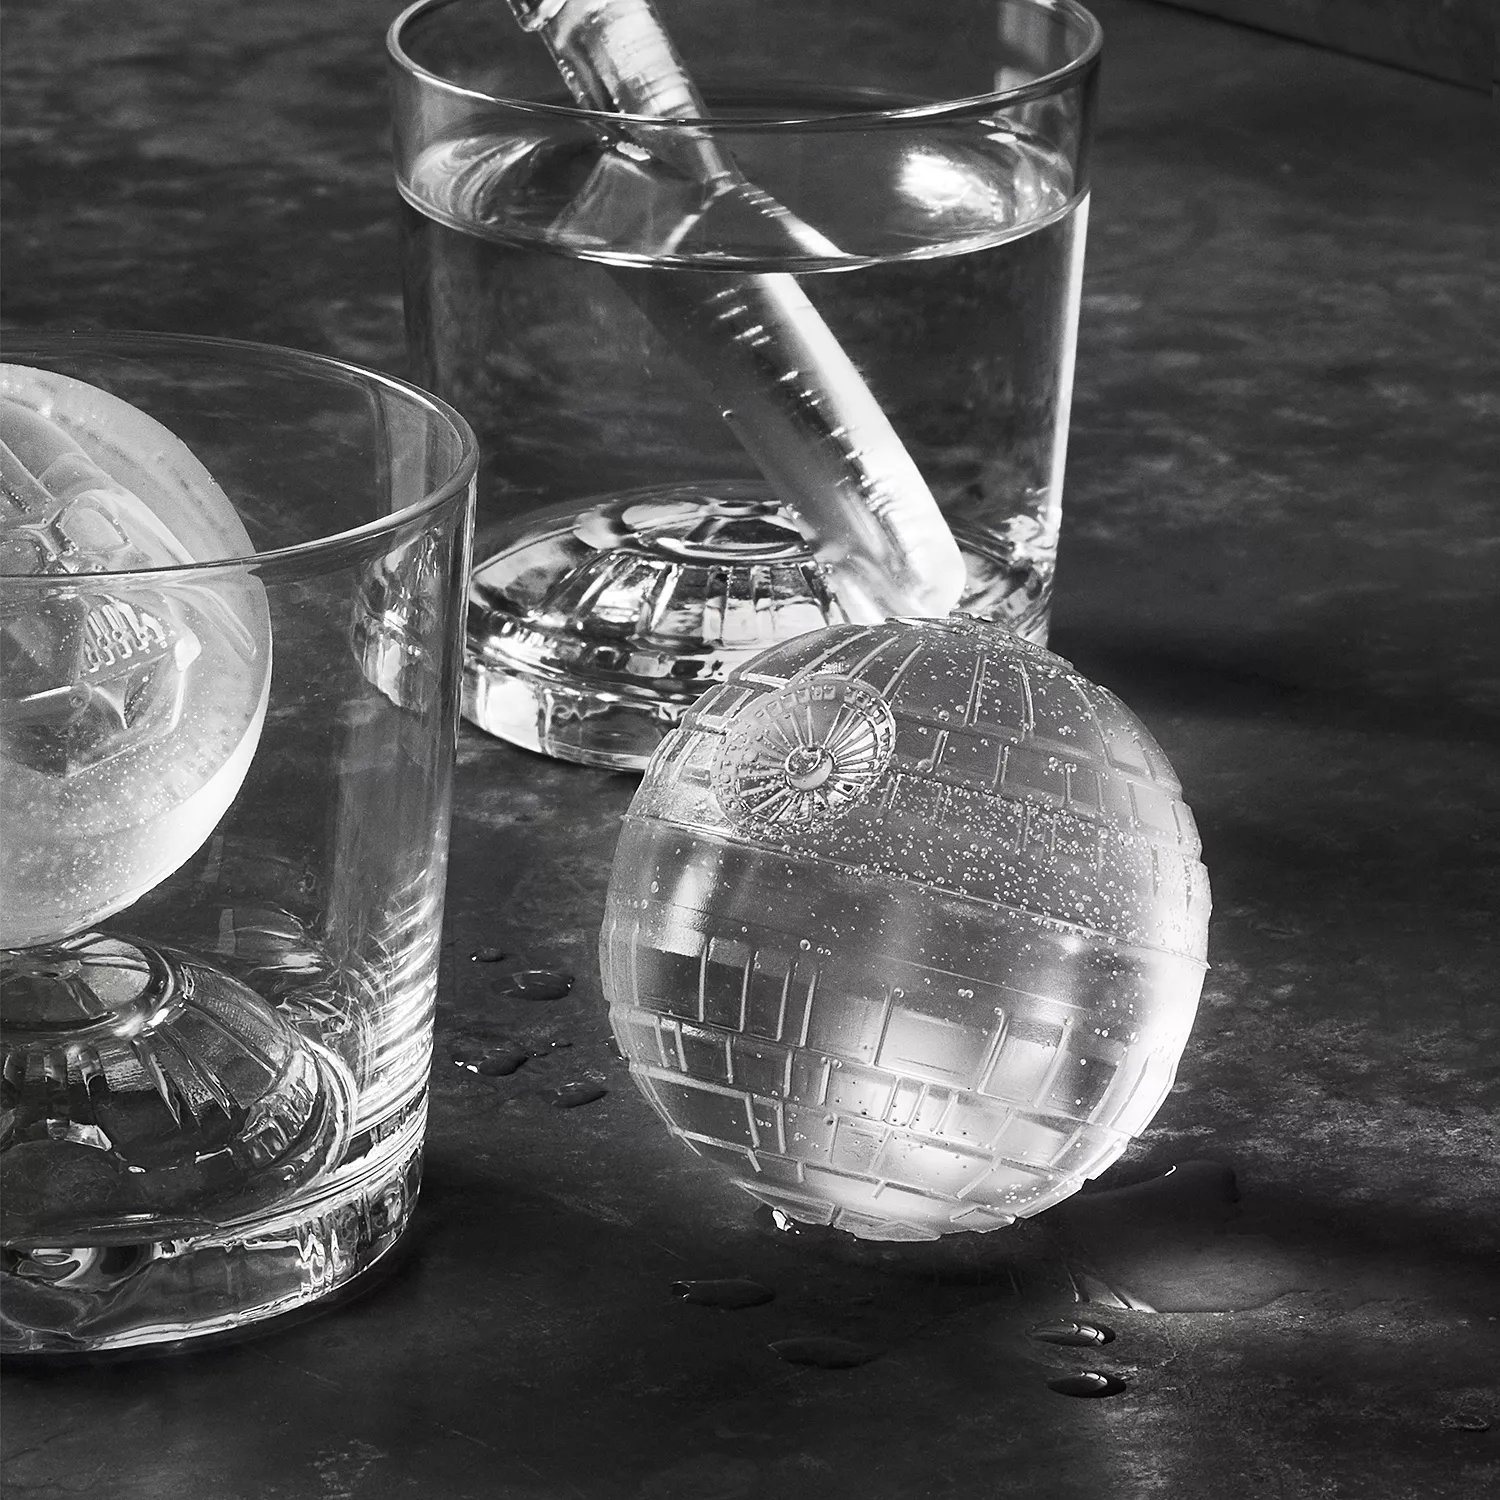 Death Star Wars Ice Cube Molds Tray, Ice Maker Tool For Whiskey